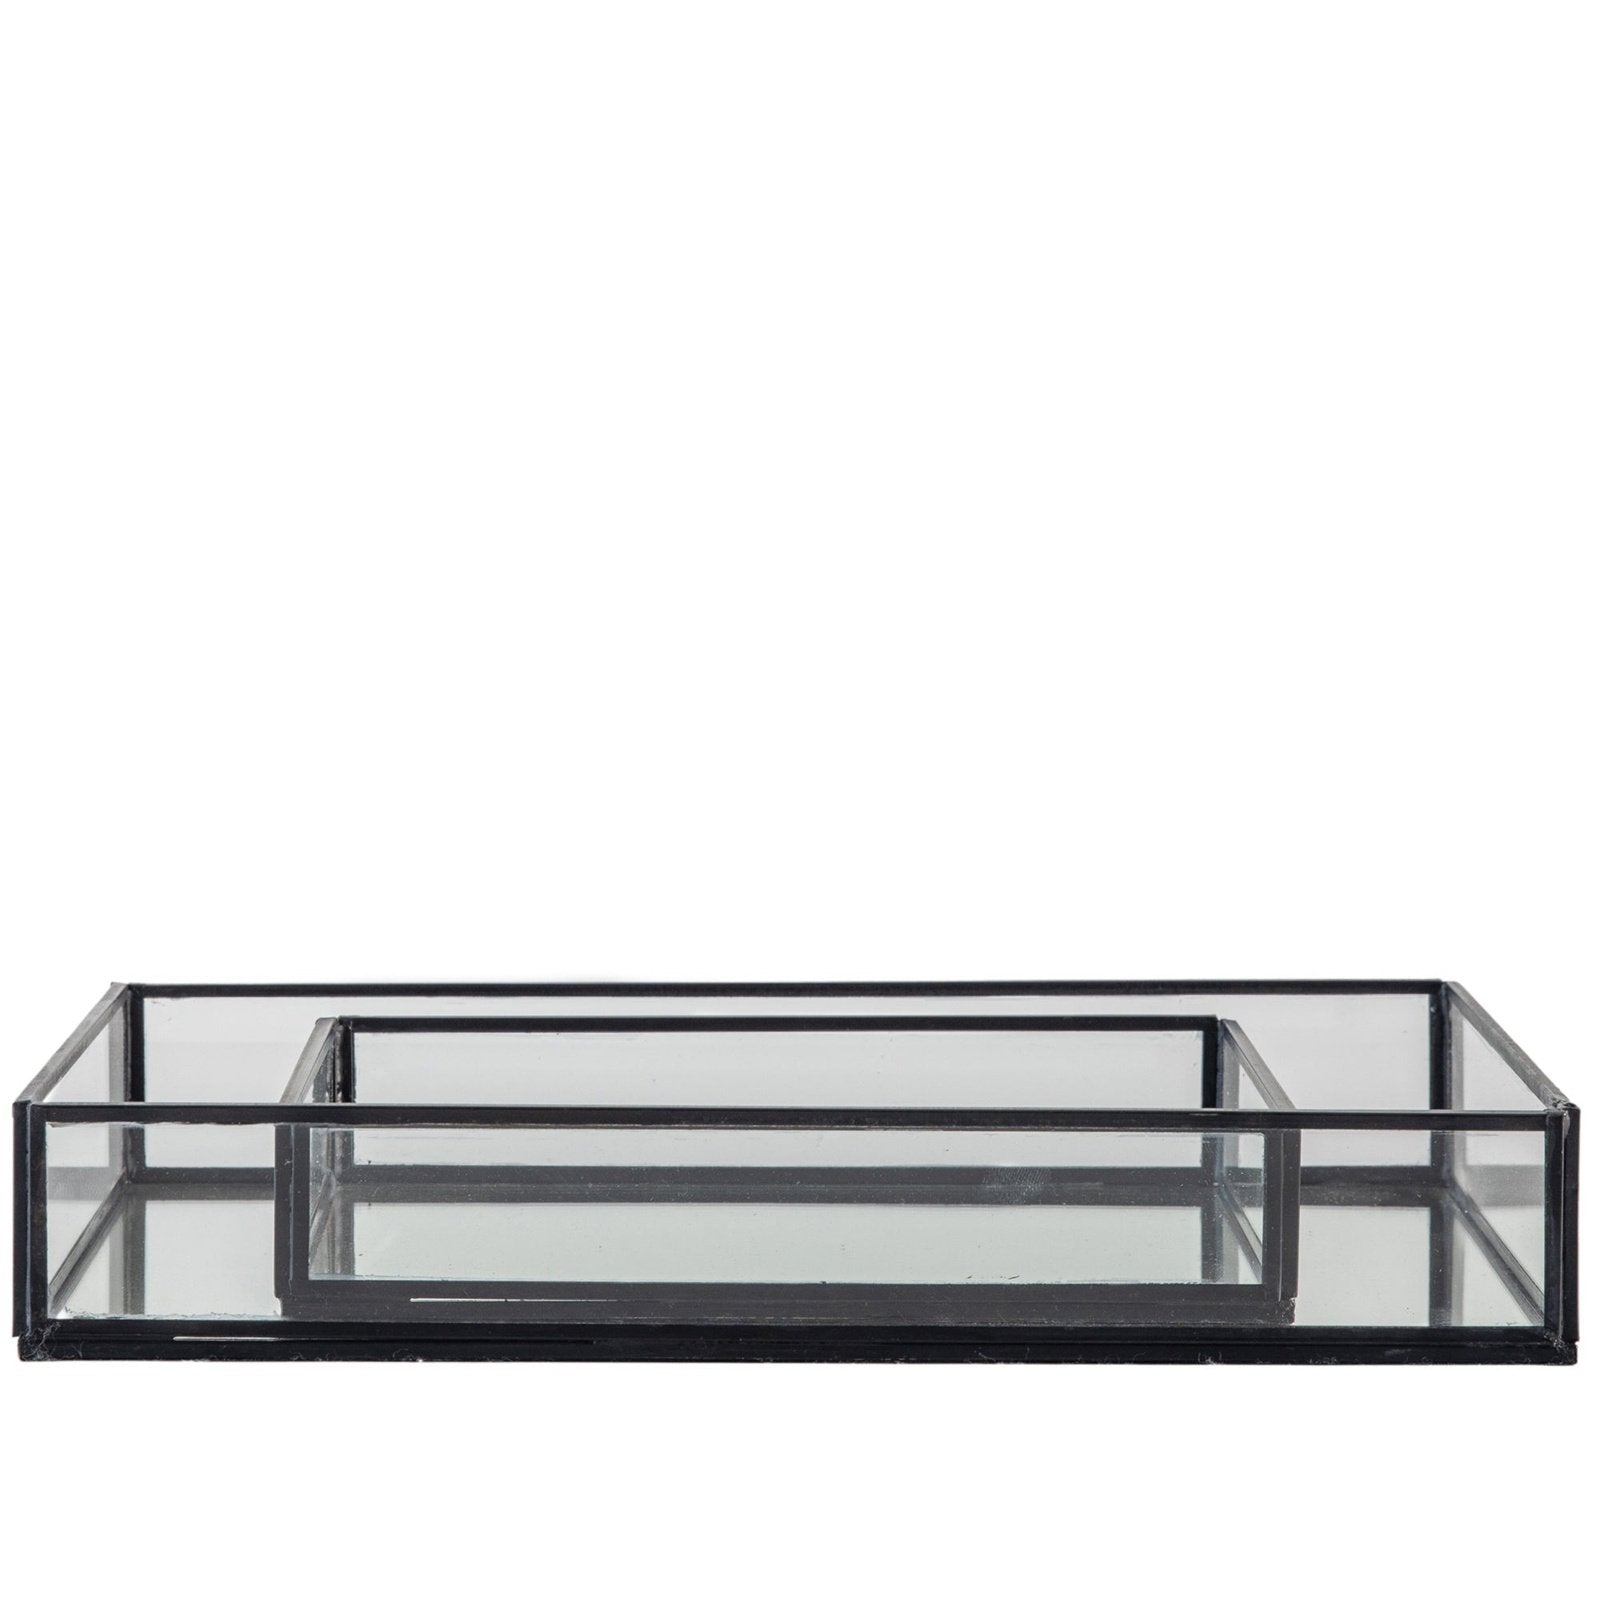 Evoque Handmade Glass Decorative Trays with Mirrored Bases Set of 2